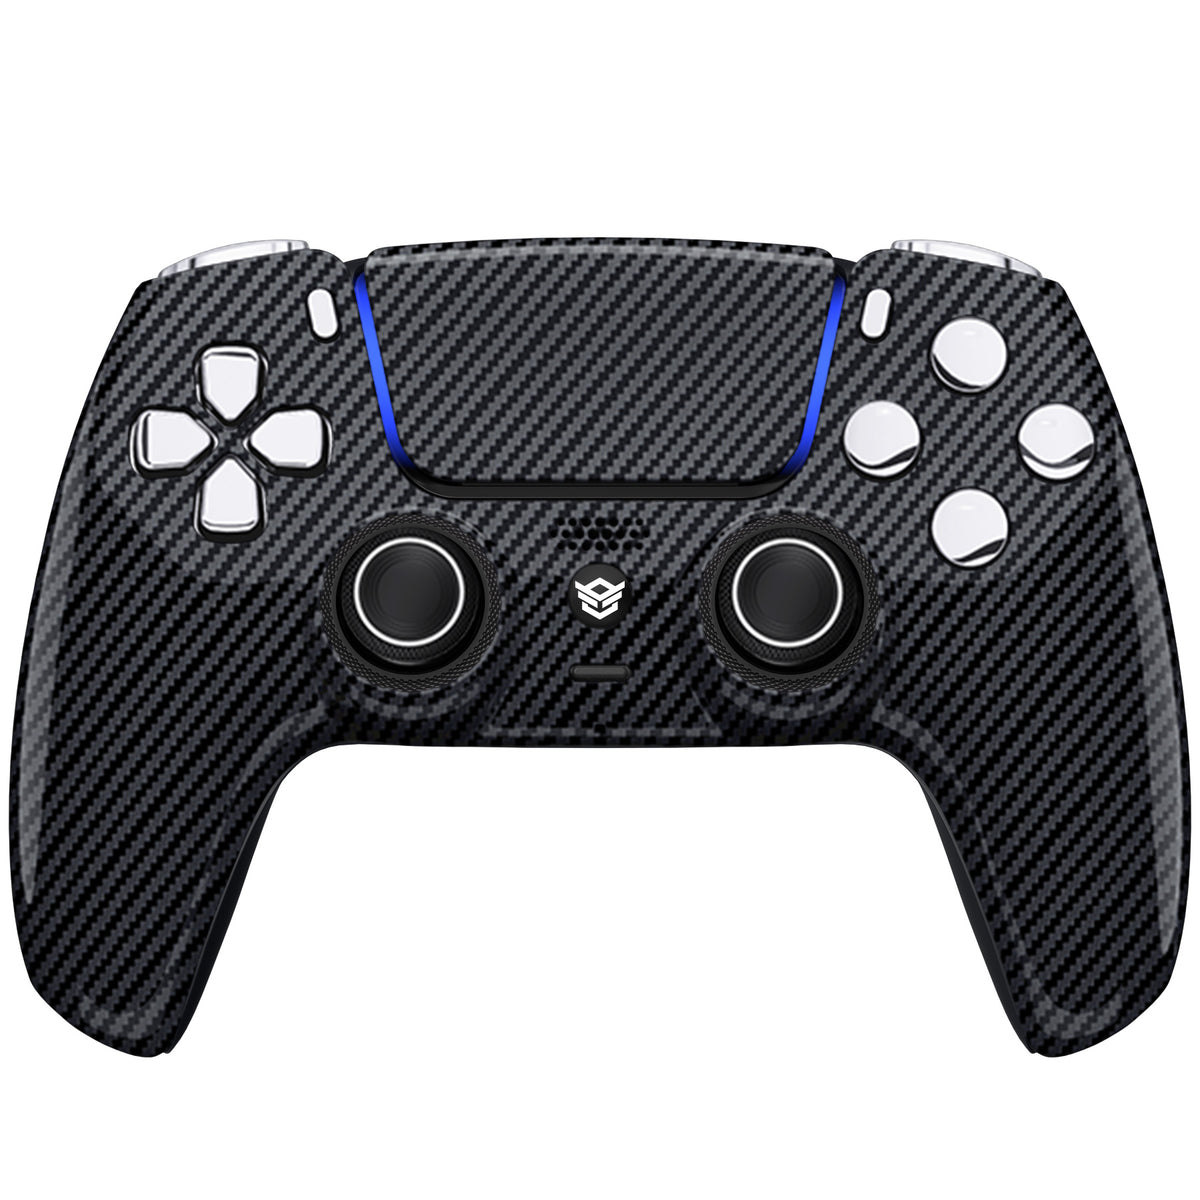  HEXGAMING HEX Esports Rival Elite Controller 2 Paddles &  Interchangeable Thumbsticks & Hair Trigger Compatible with ps5 Customized  Game Controller PC Wireless FPS Gamepad - Black : Video Games